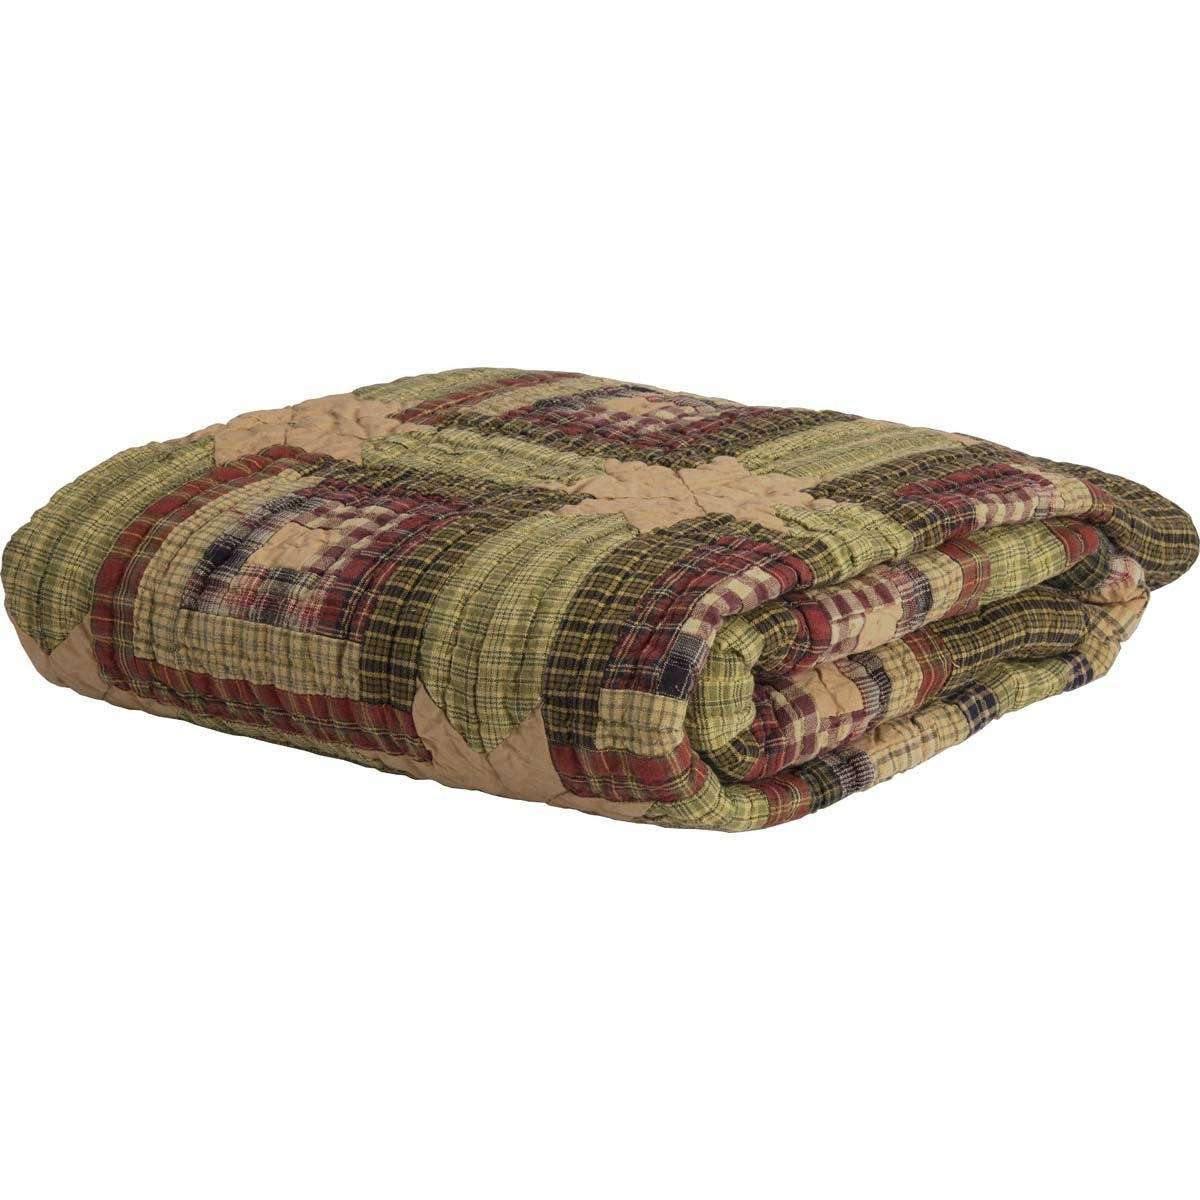 Tea Cabin Throw Quilted 60x50 VHC Brands folded